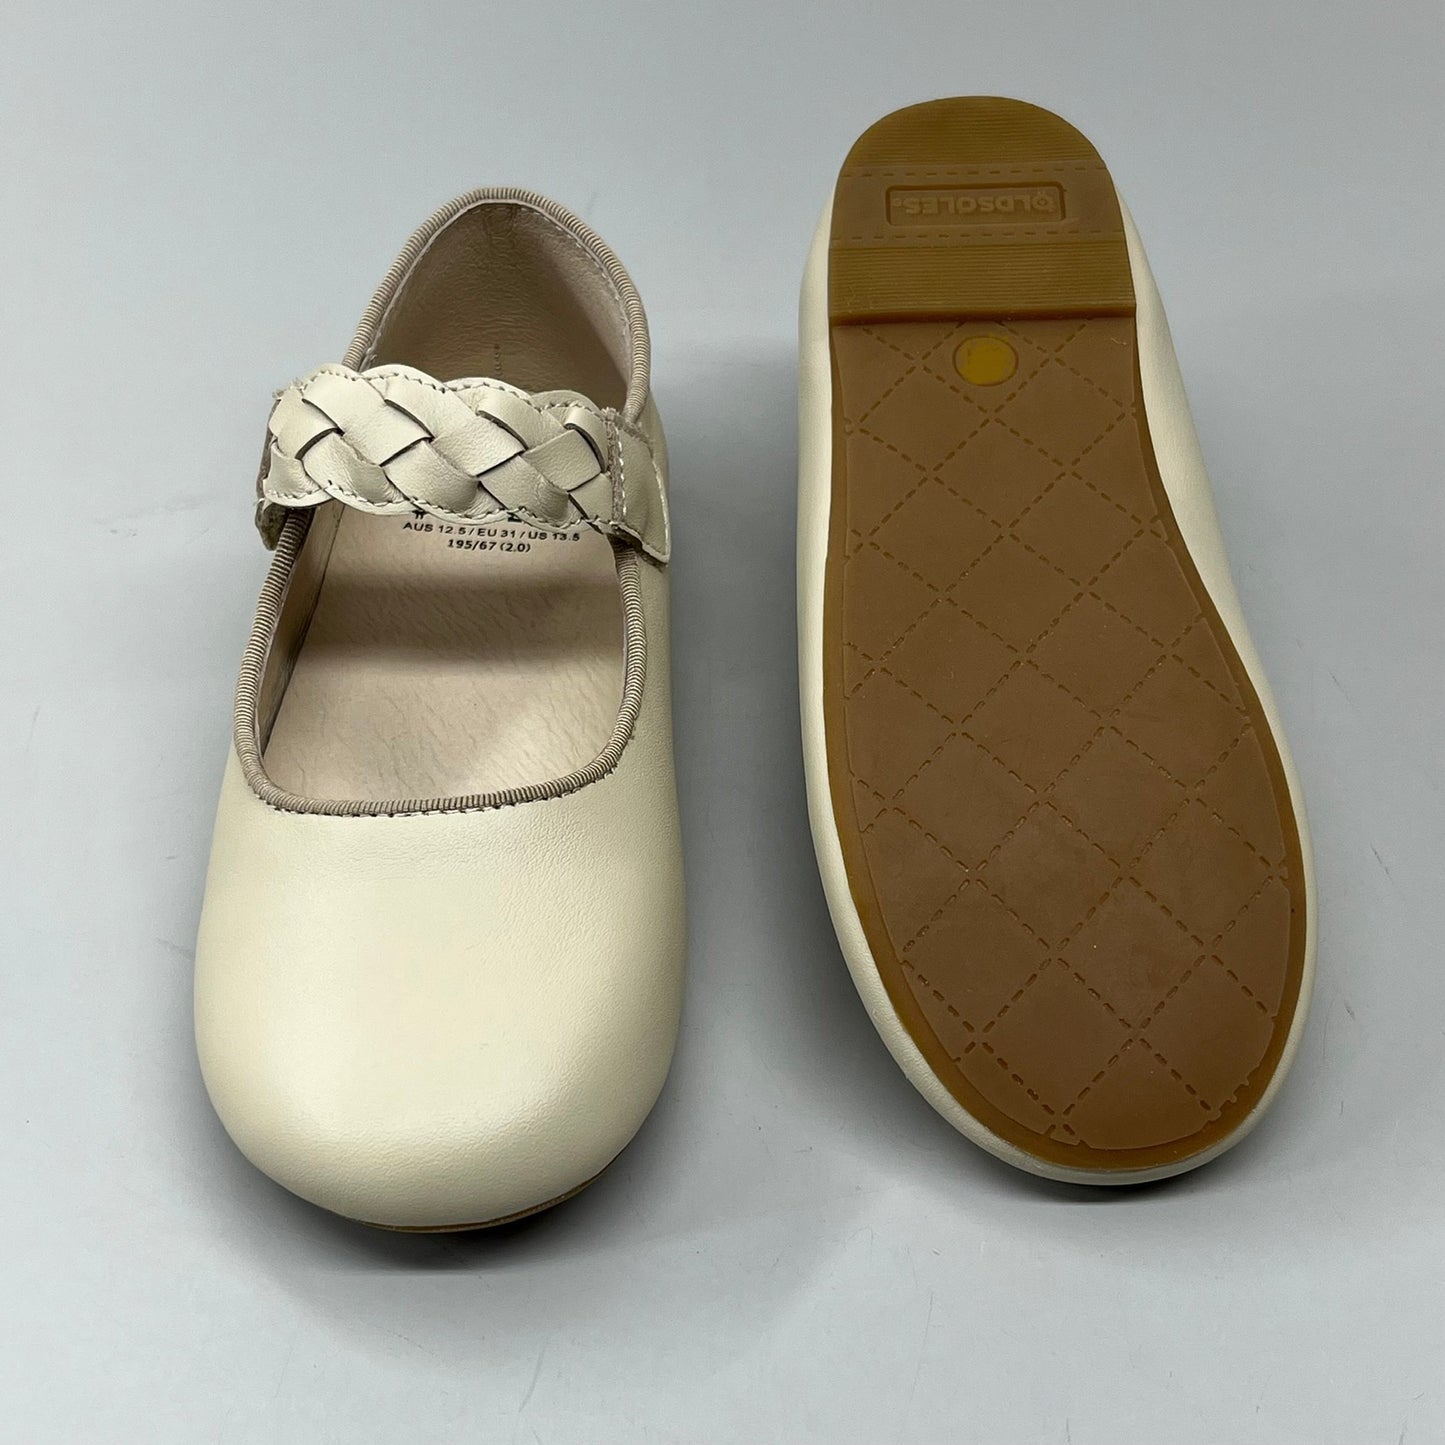 OLD SOLES Lady Plat Braided Strap Leather Shoe Kid’s Sz 22 US 6 Cream #817